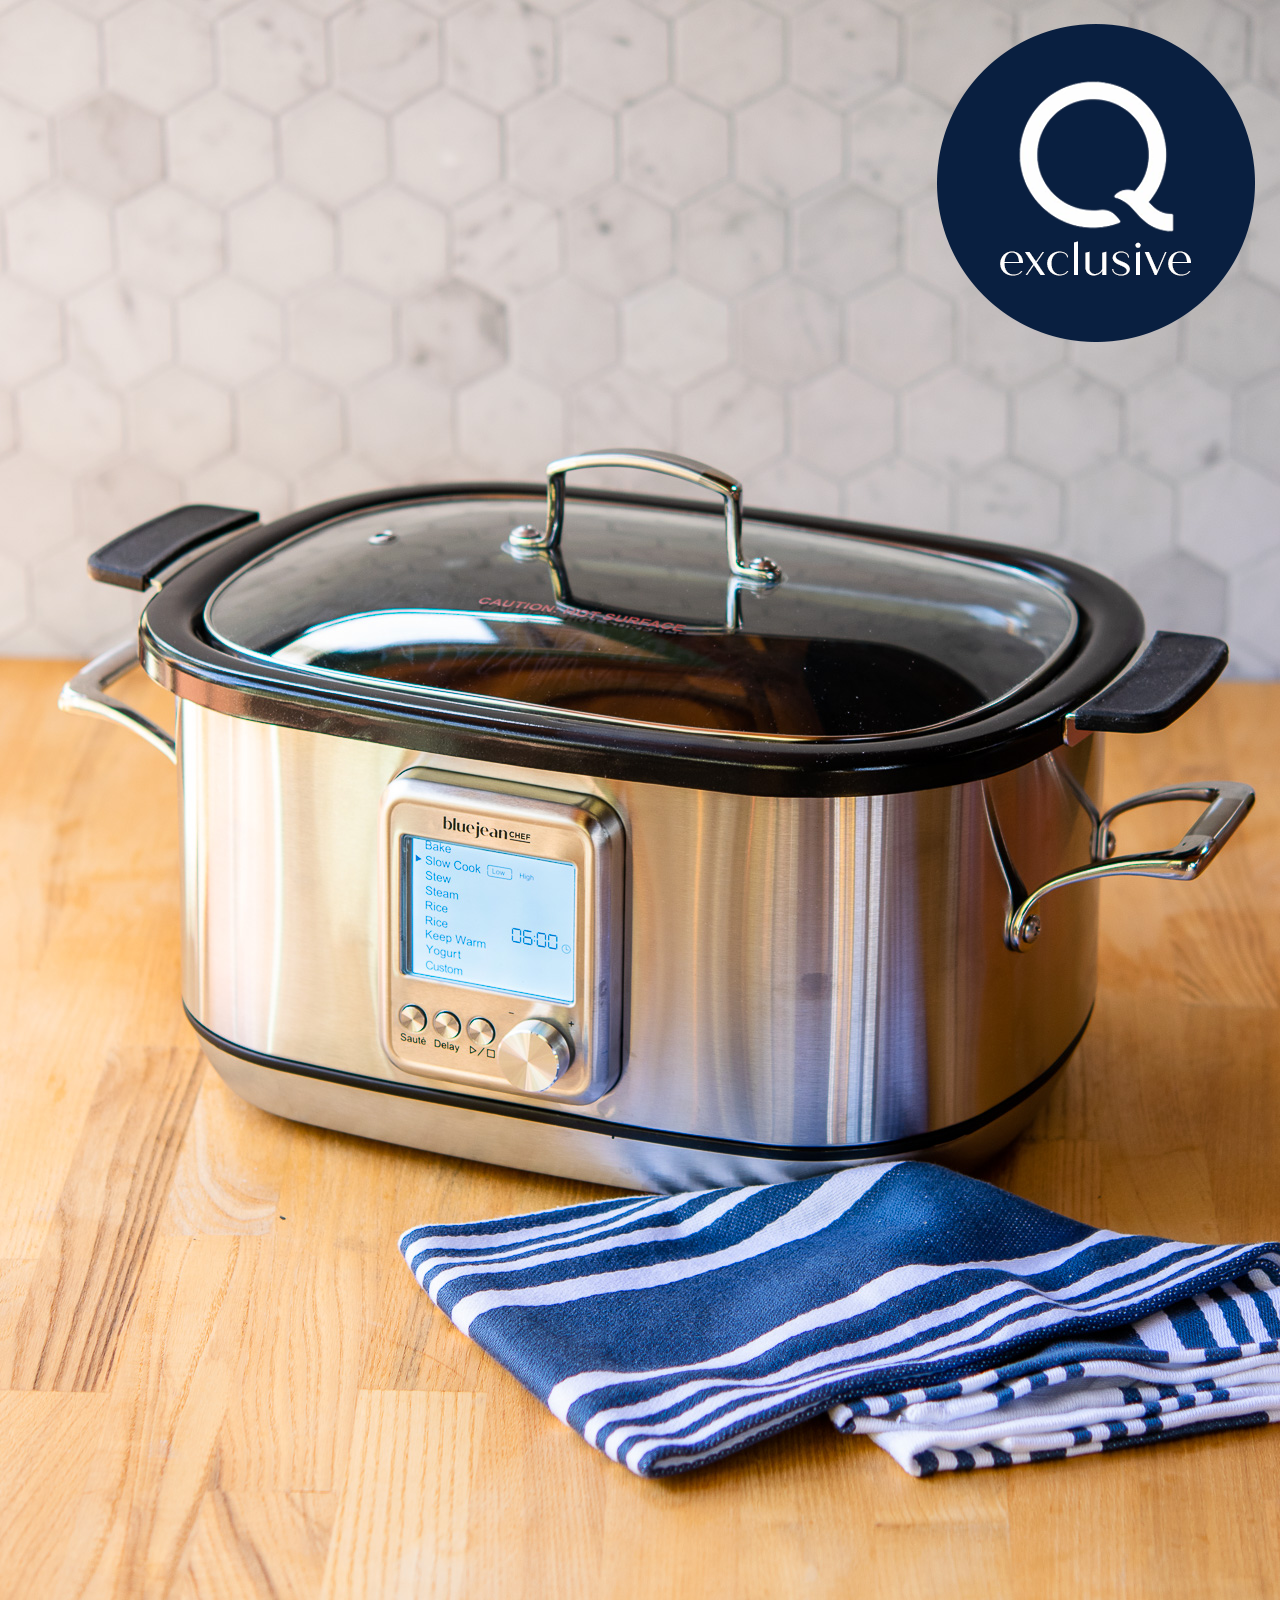 Blue Jean Chef Slow Cooker  Blue Jean Chef - Meredith Laurence